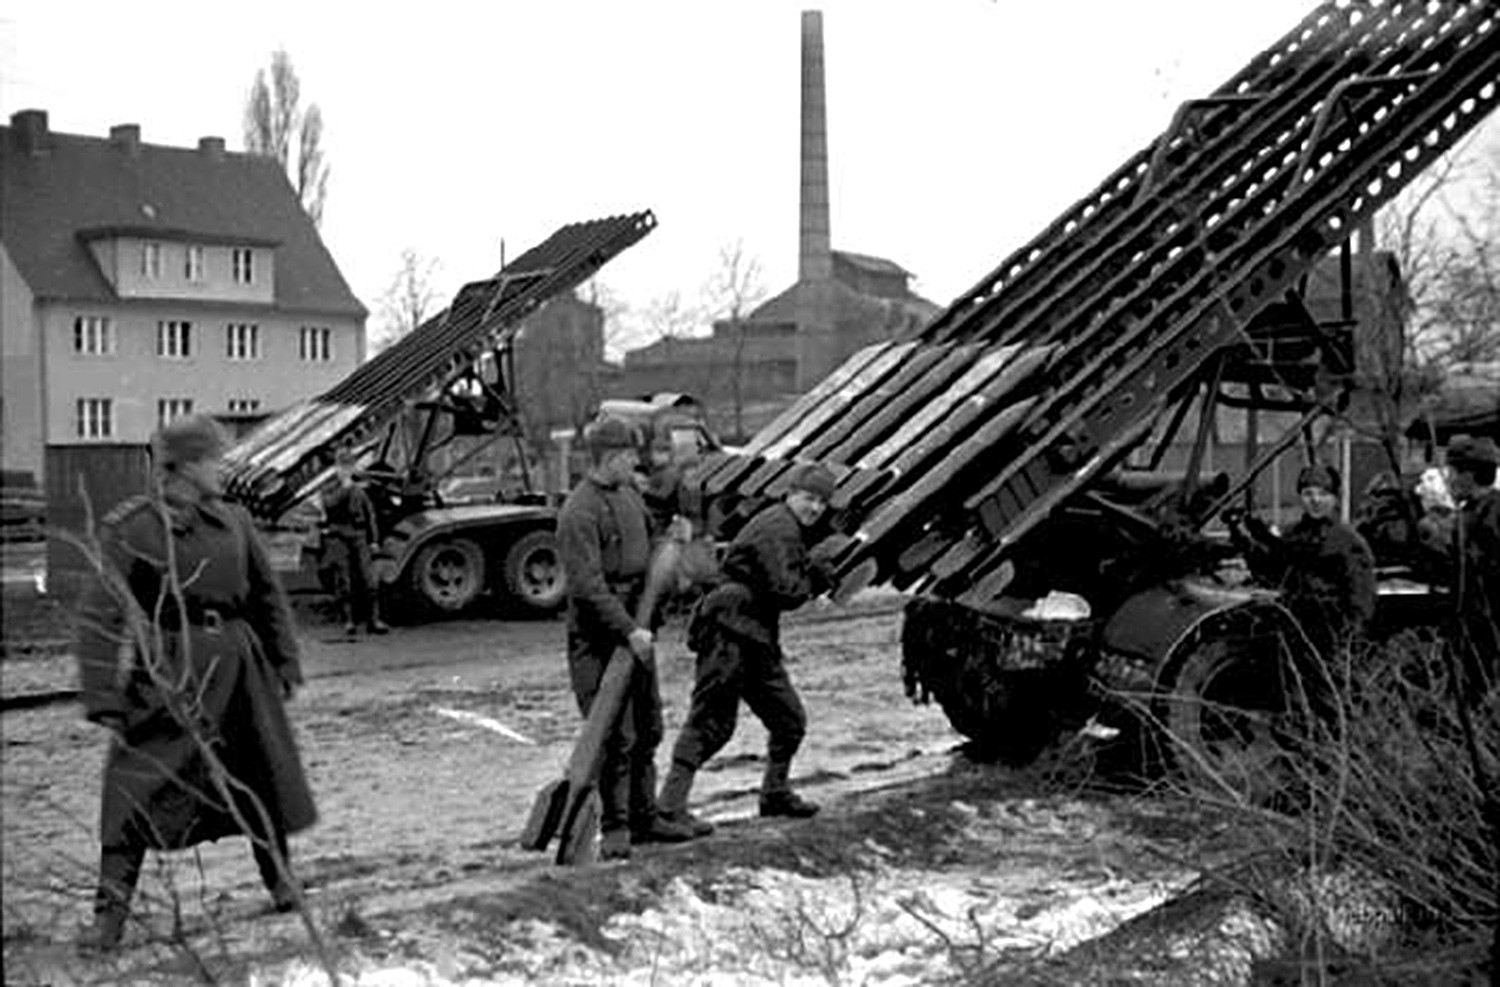 Fire power of Katyushas' salvo was comparable to that one of 70 heavy artillery guns combined